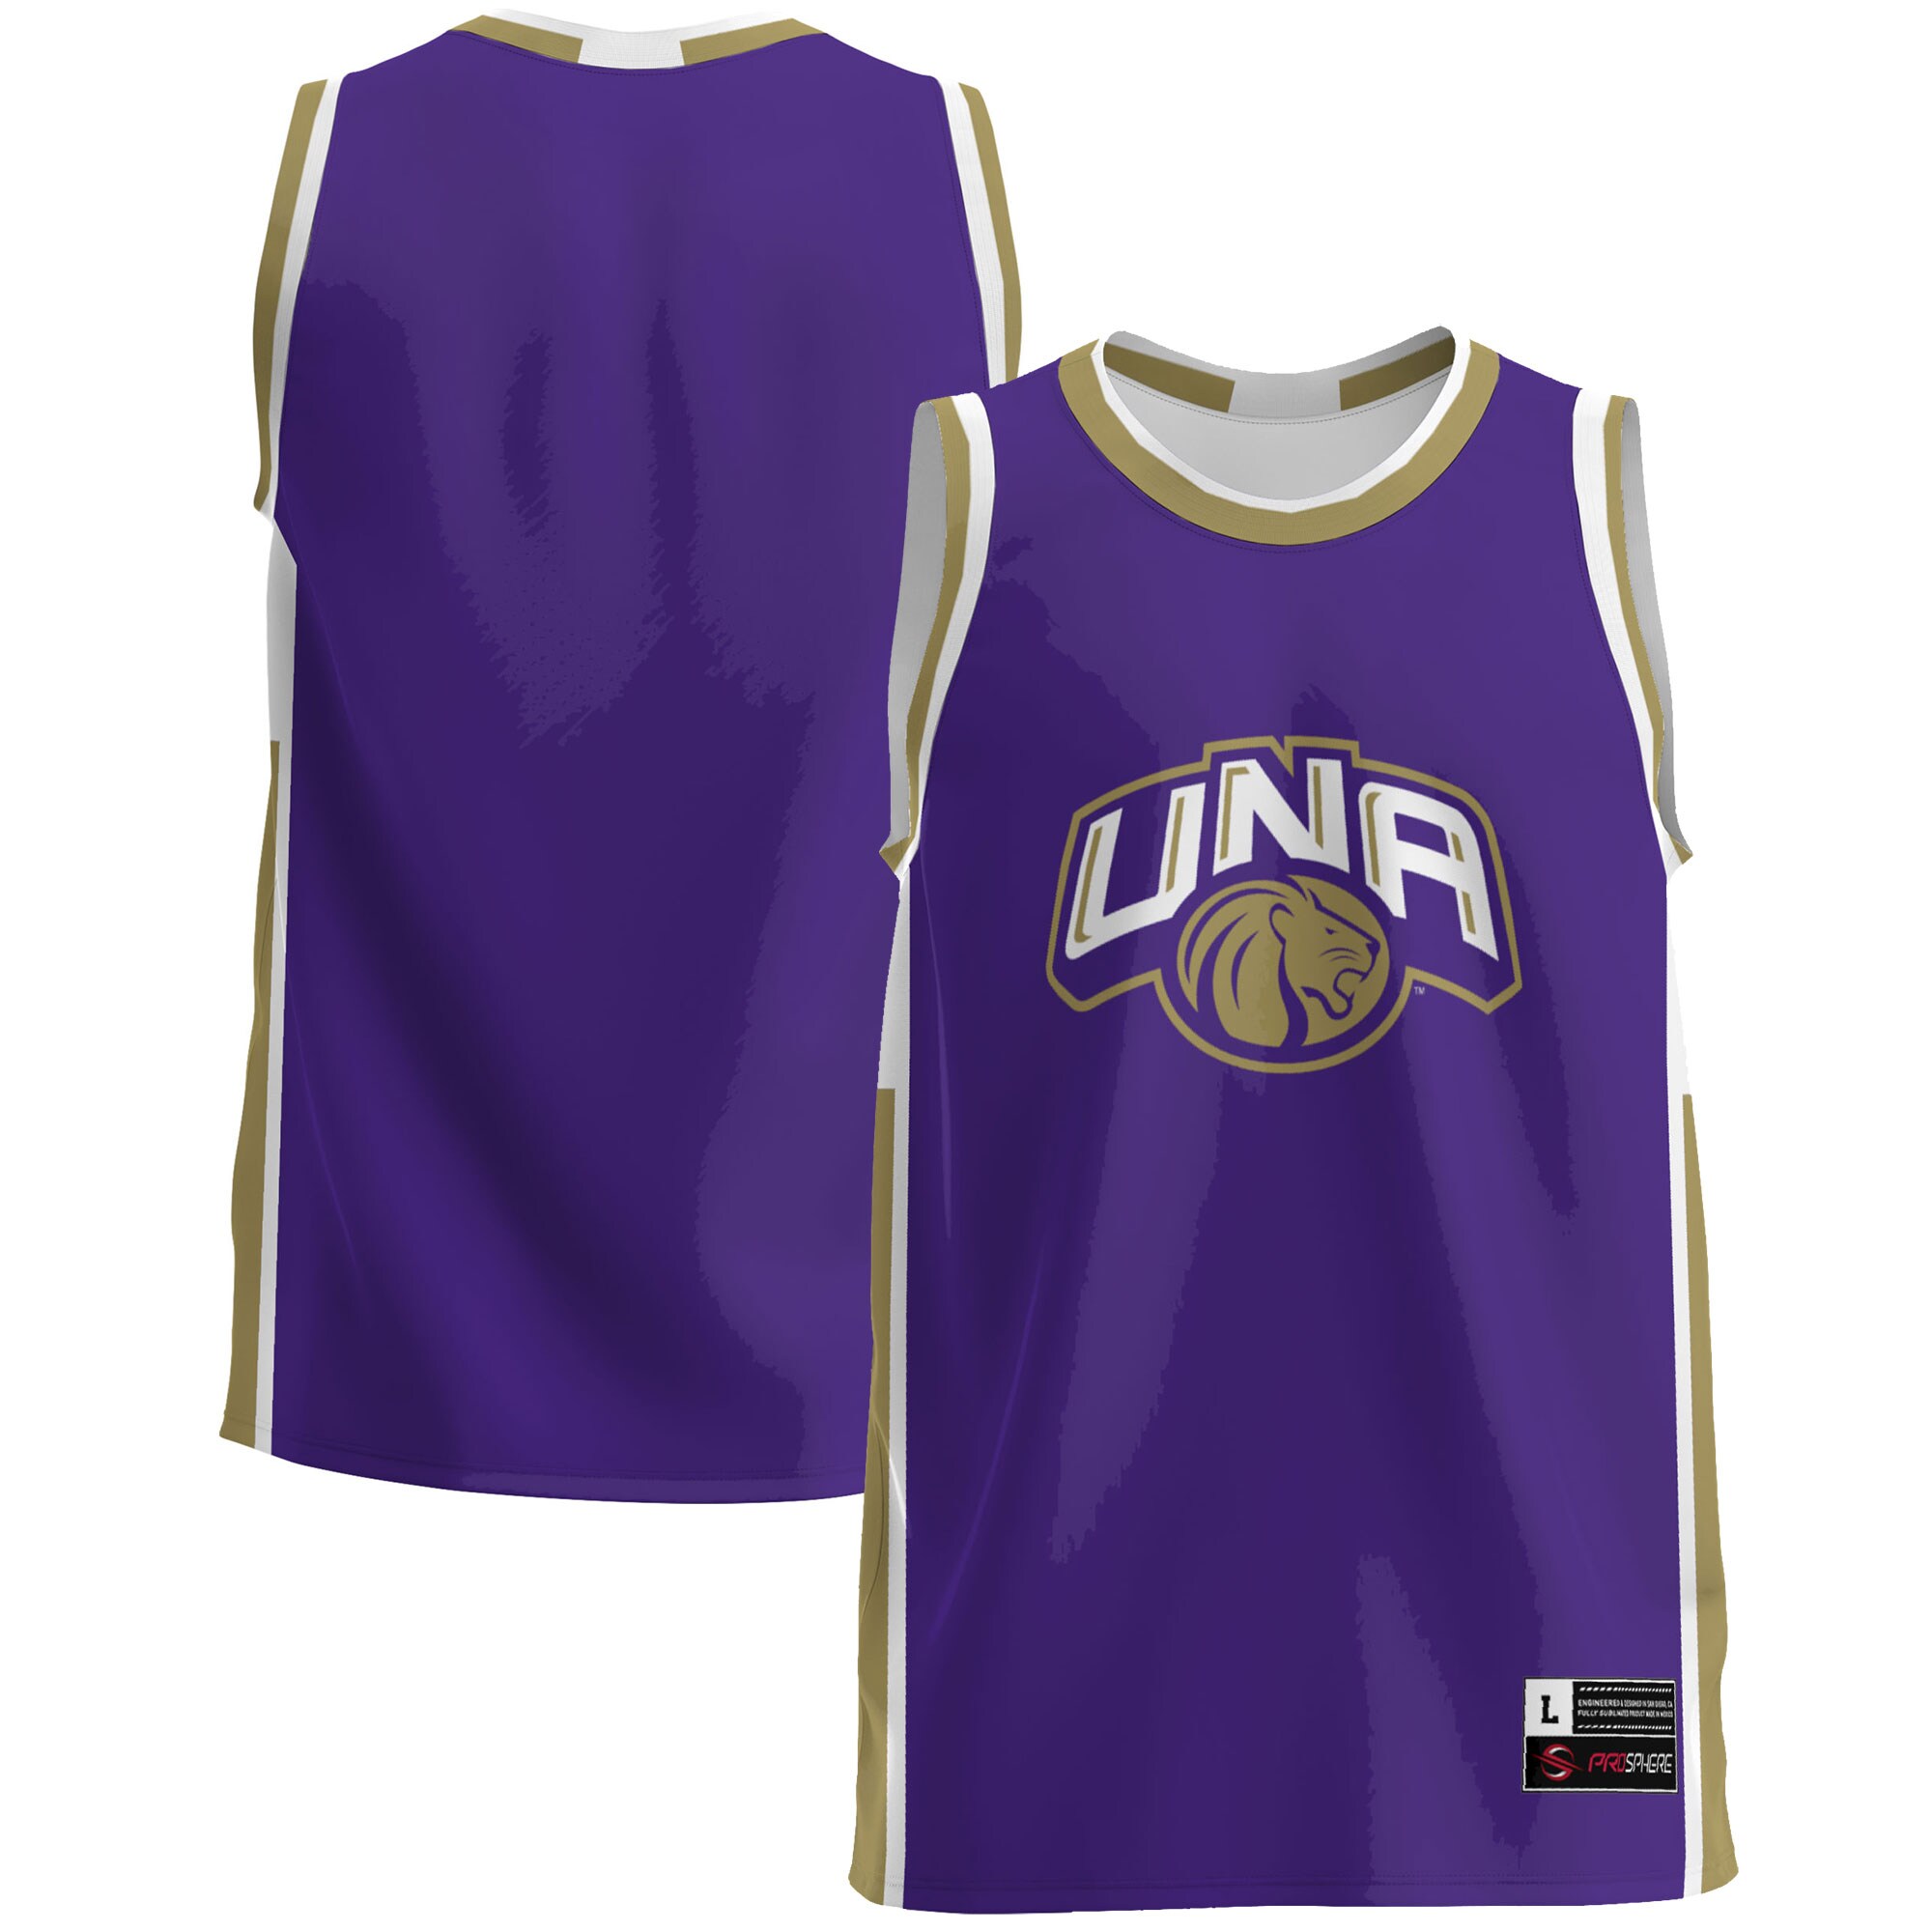 North Alabama Lions Basketball Jersey - Purple For Youth Women Men